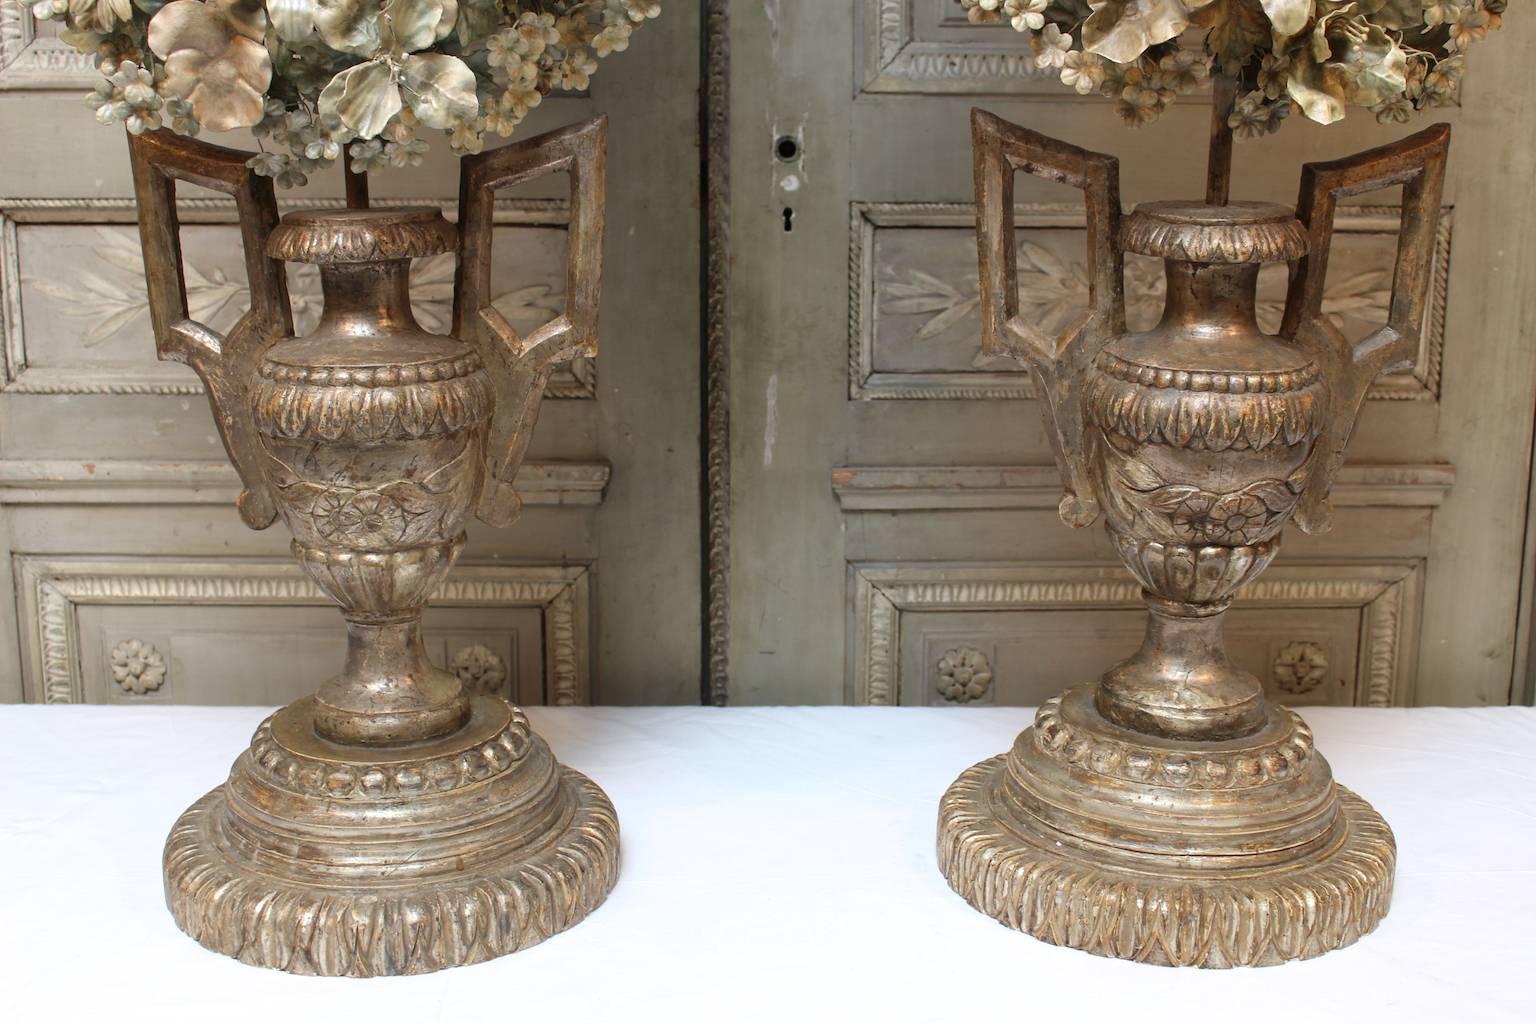 Baroque Very Large Pair of Italian Wood and Tole Urn Alter Pieces Candelabra